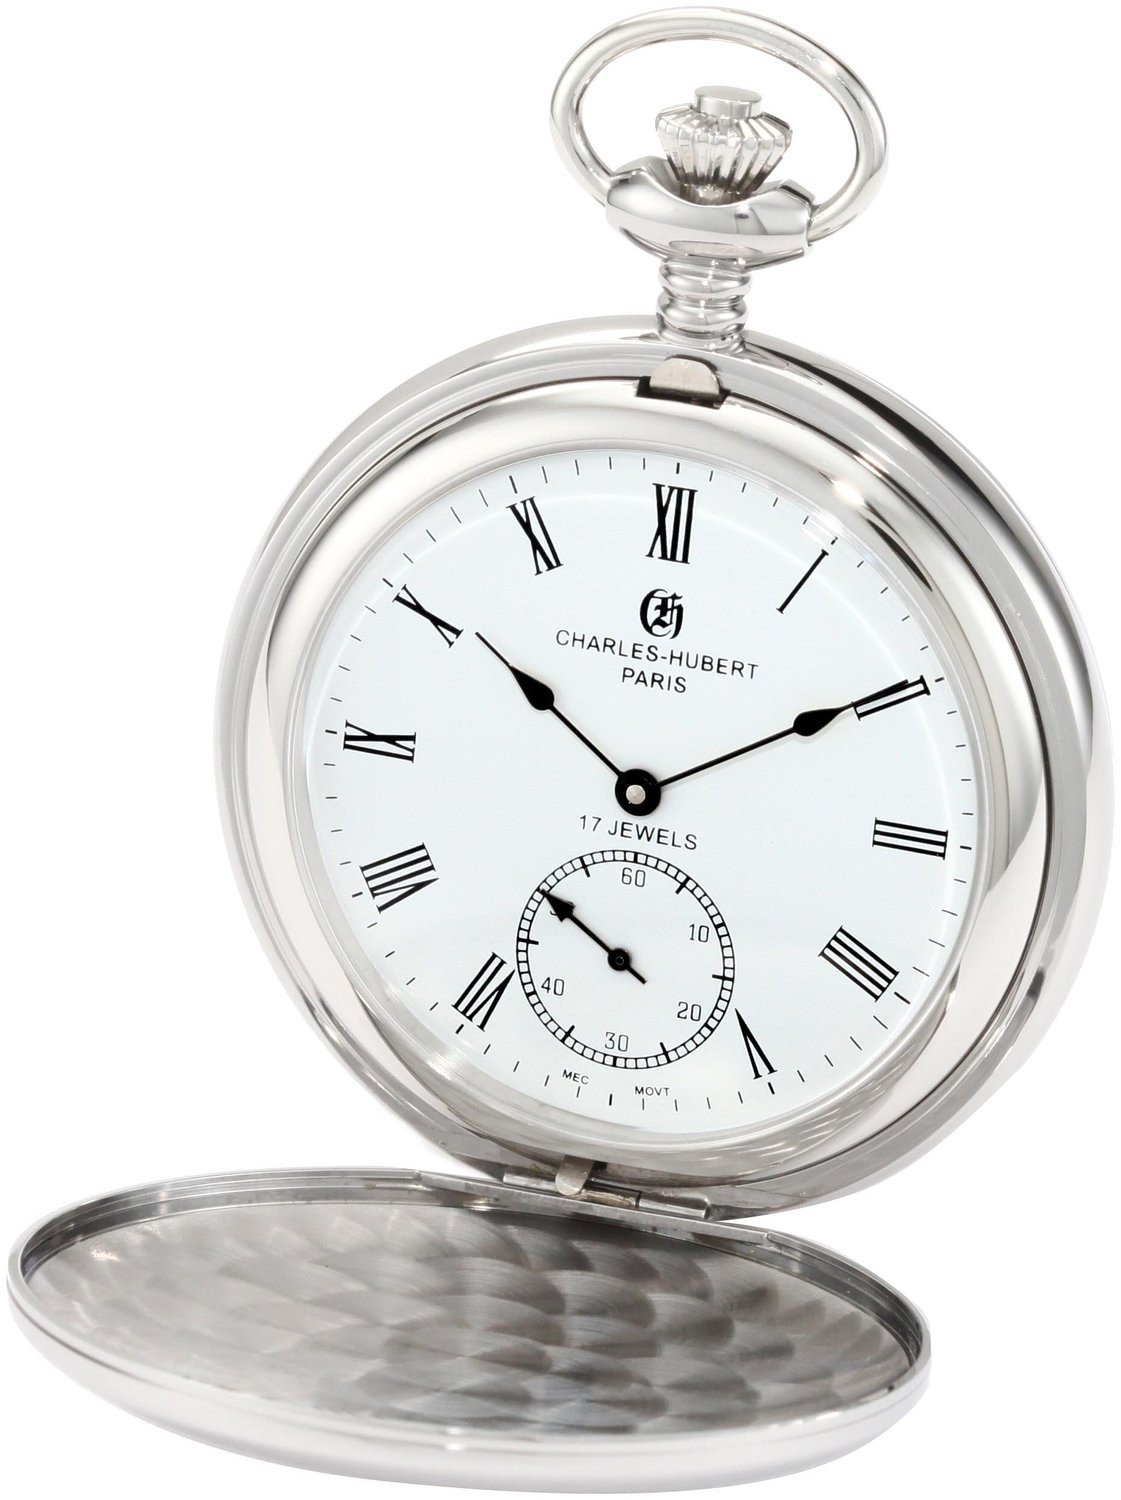 Charles-Hubert Paris Stainless Steel Polished Finish Double Hunter Case